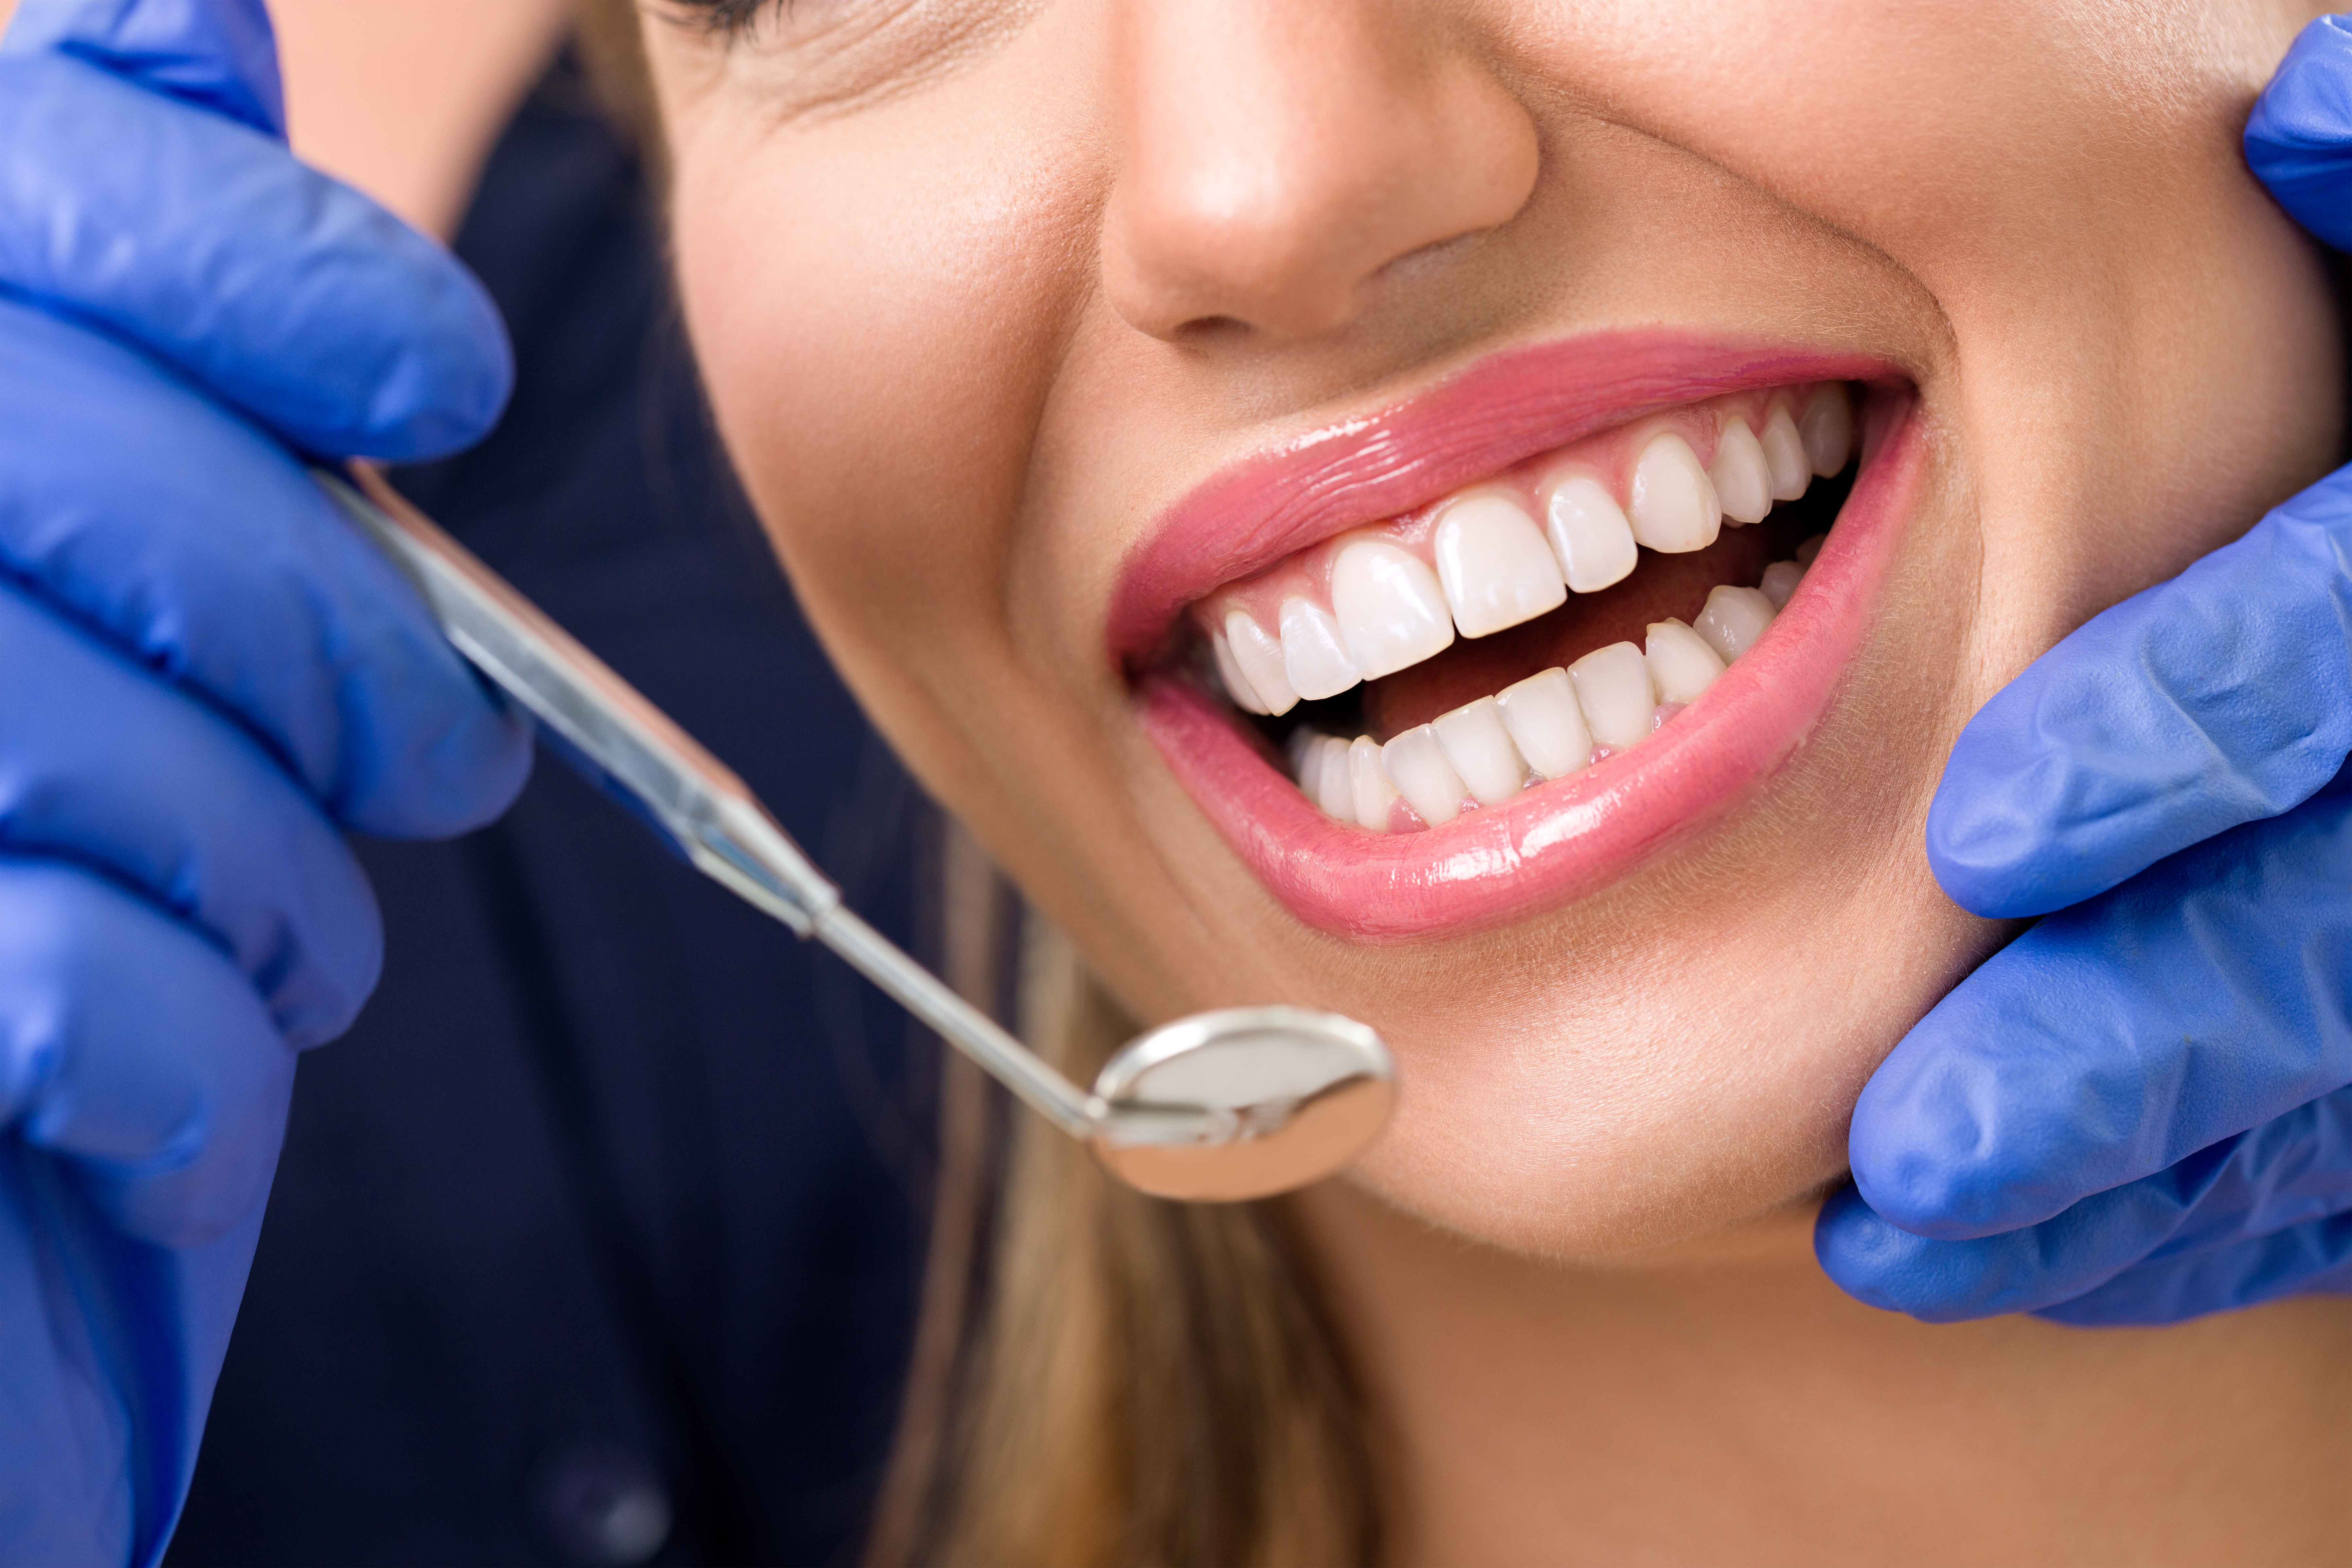 Smiling woman at dentist during oral inspection